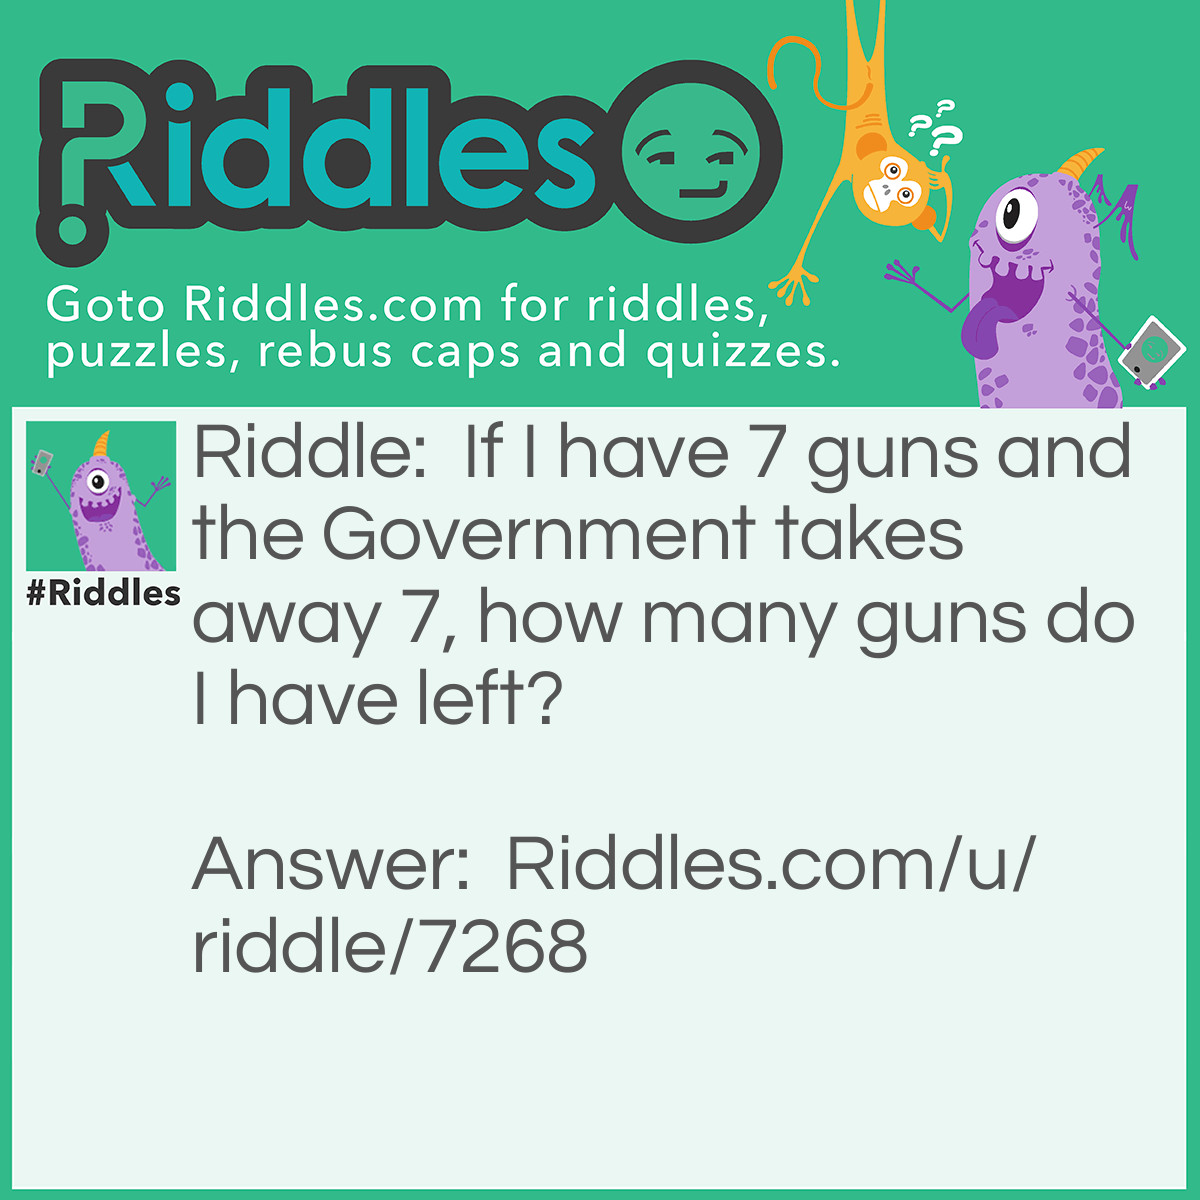 Riddle: If I have 7 guns and the Government takes away 7, how many guns do I have left? Answer: 26. I lied about the 7. Don’t mess with Texas!